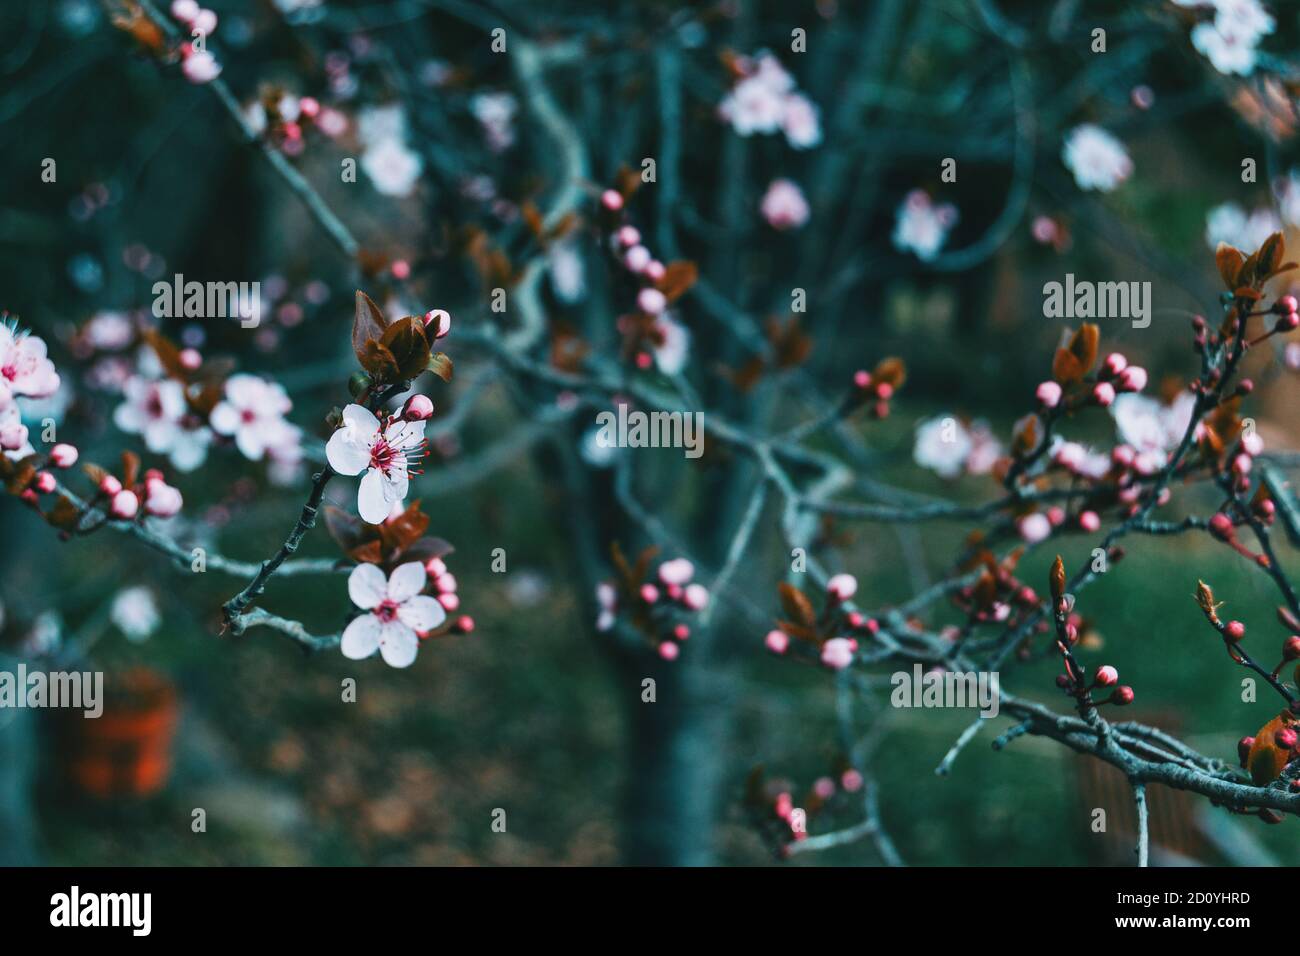 Close-up of flowers and buds of prunus cerasifera on some branches in the wild Stock Photo